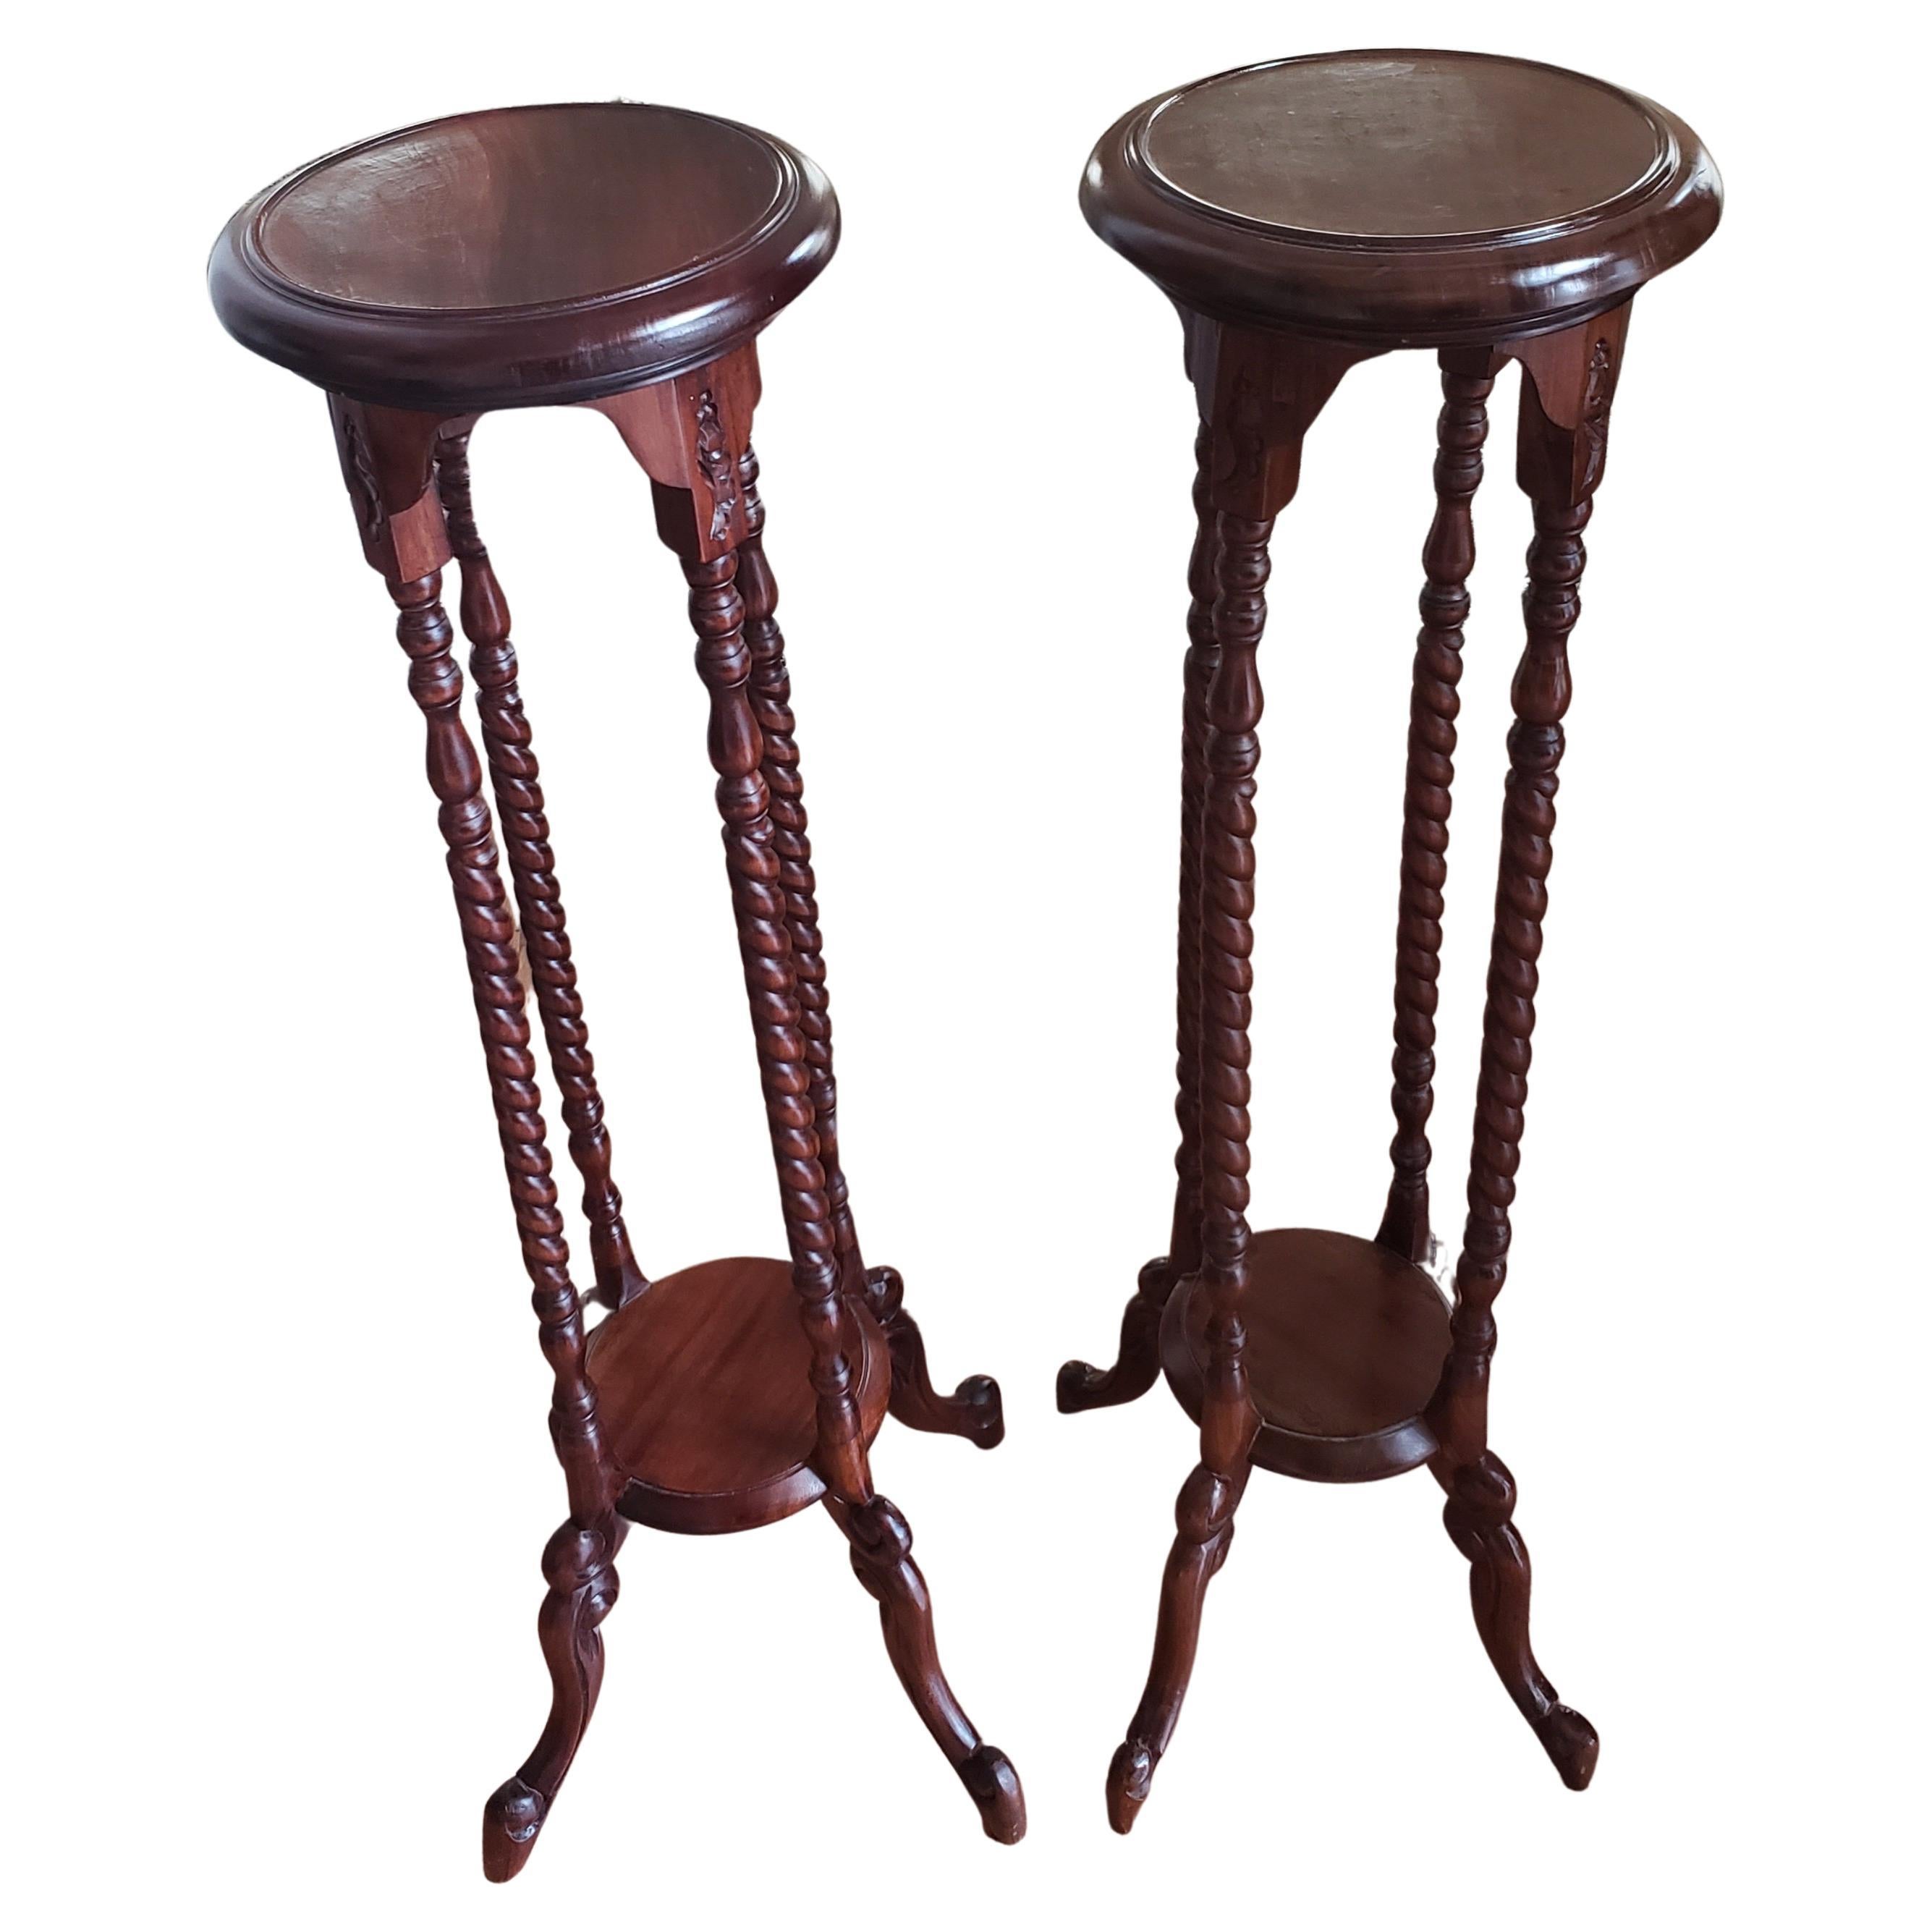 Exquisite pair of Vintage Victorianstyle mahogany barley twist legs plant stands.
Hand crafted in very good vintage condition. Measures 11.75